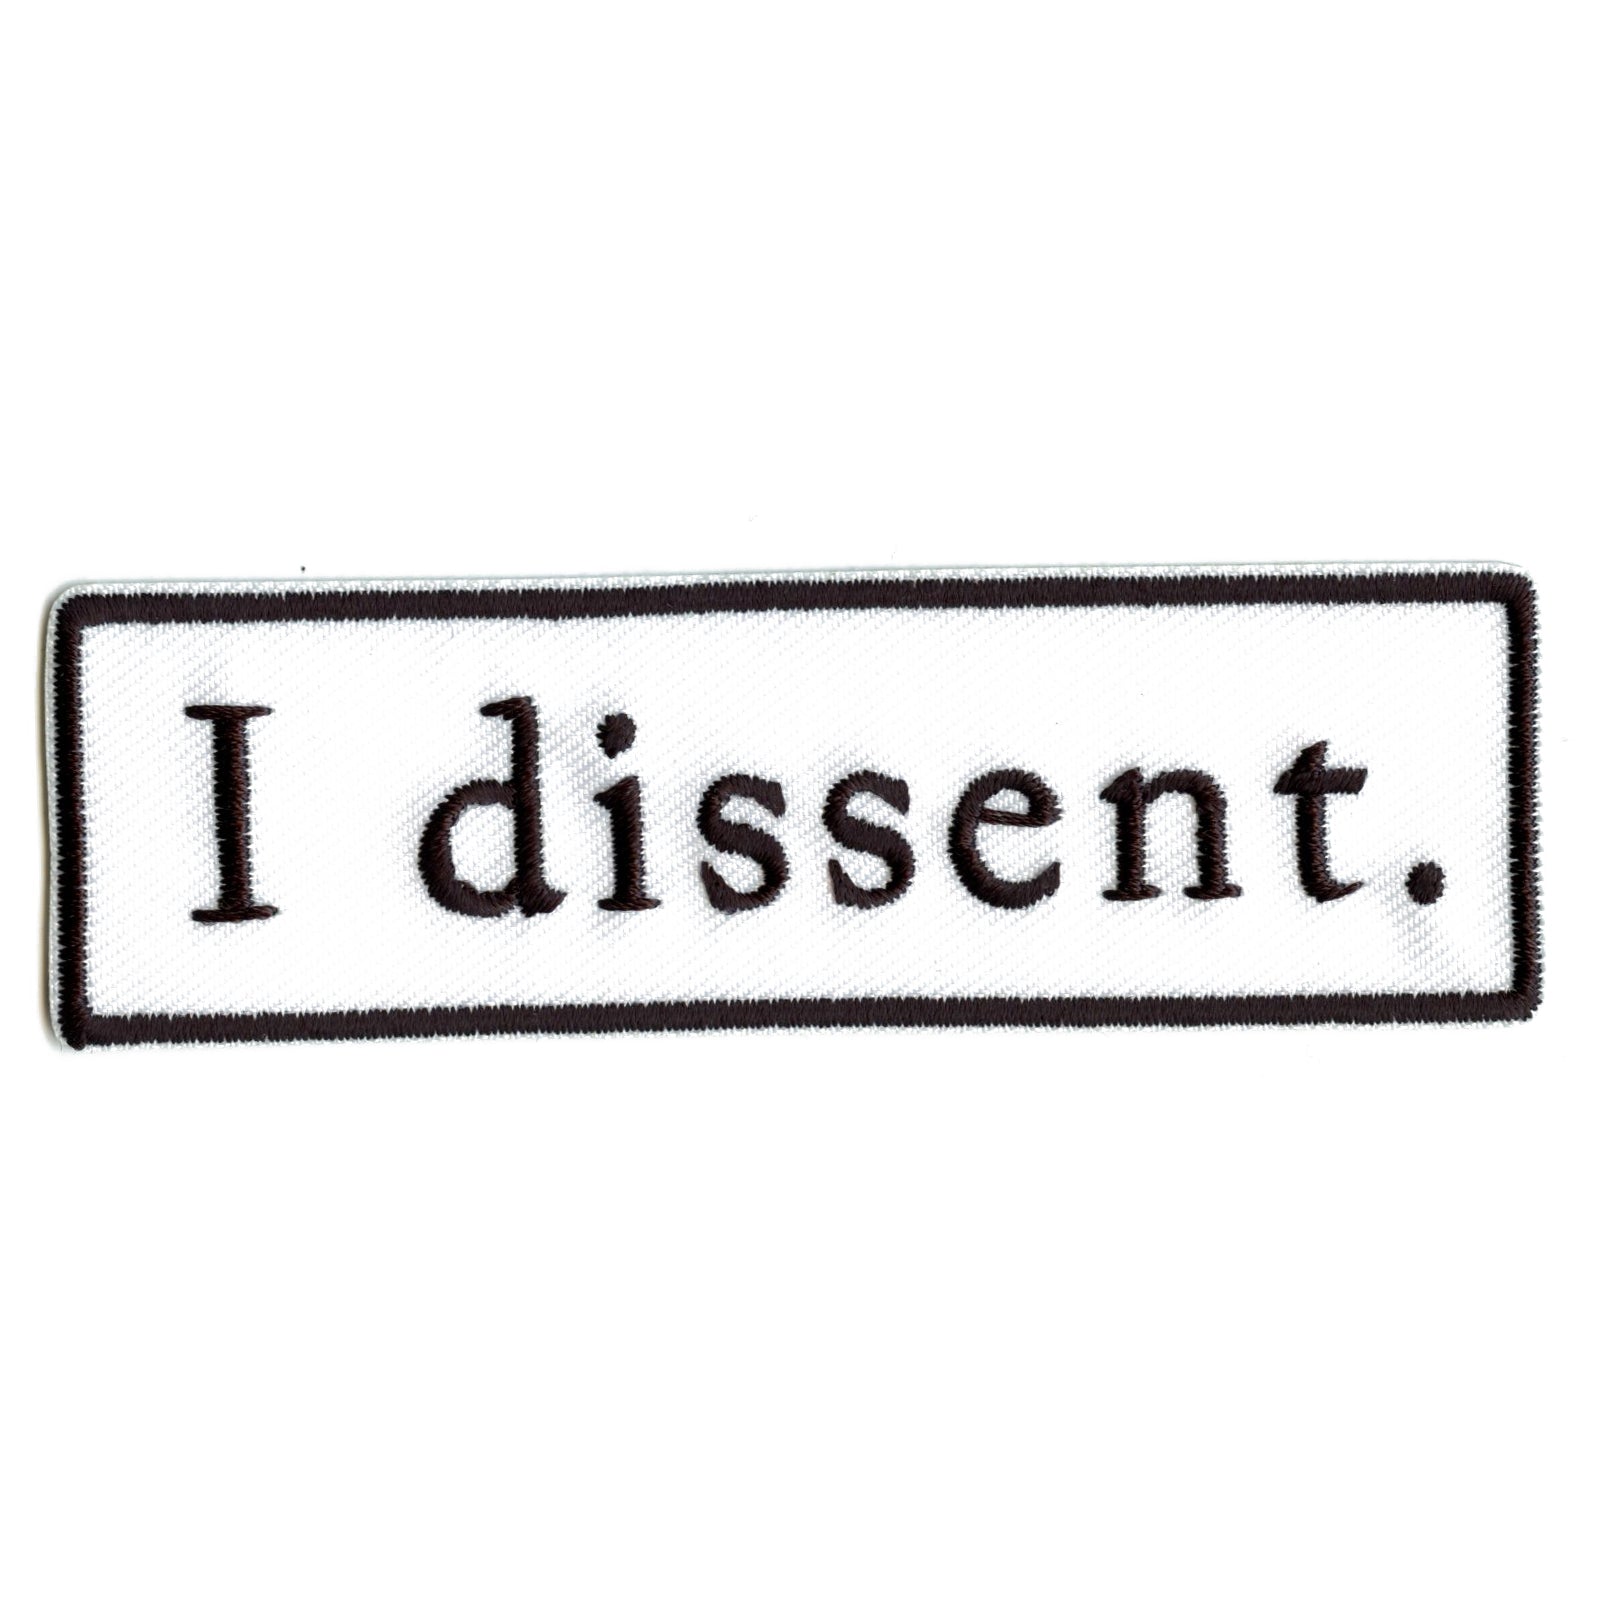 Ruth Bader Ginsburg I Dissent. Embroidered Iron On Patch 